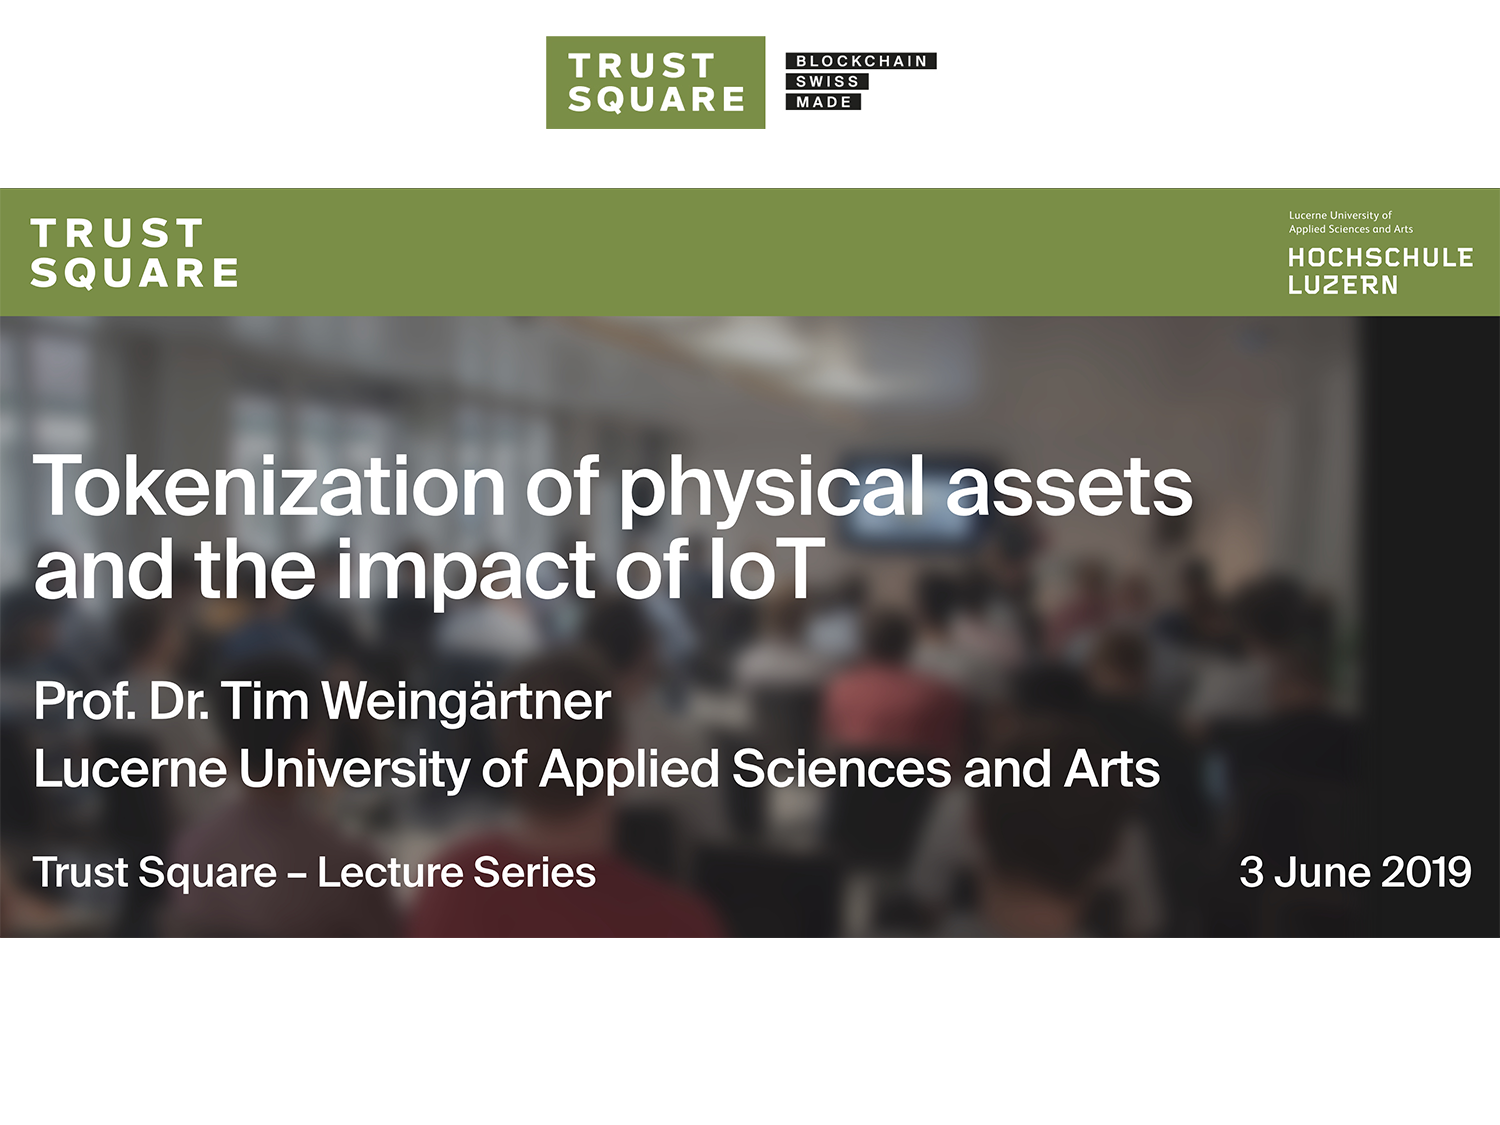 Trust Square Lecture Series - Tokenization of physical assets and the impact of IoT